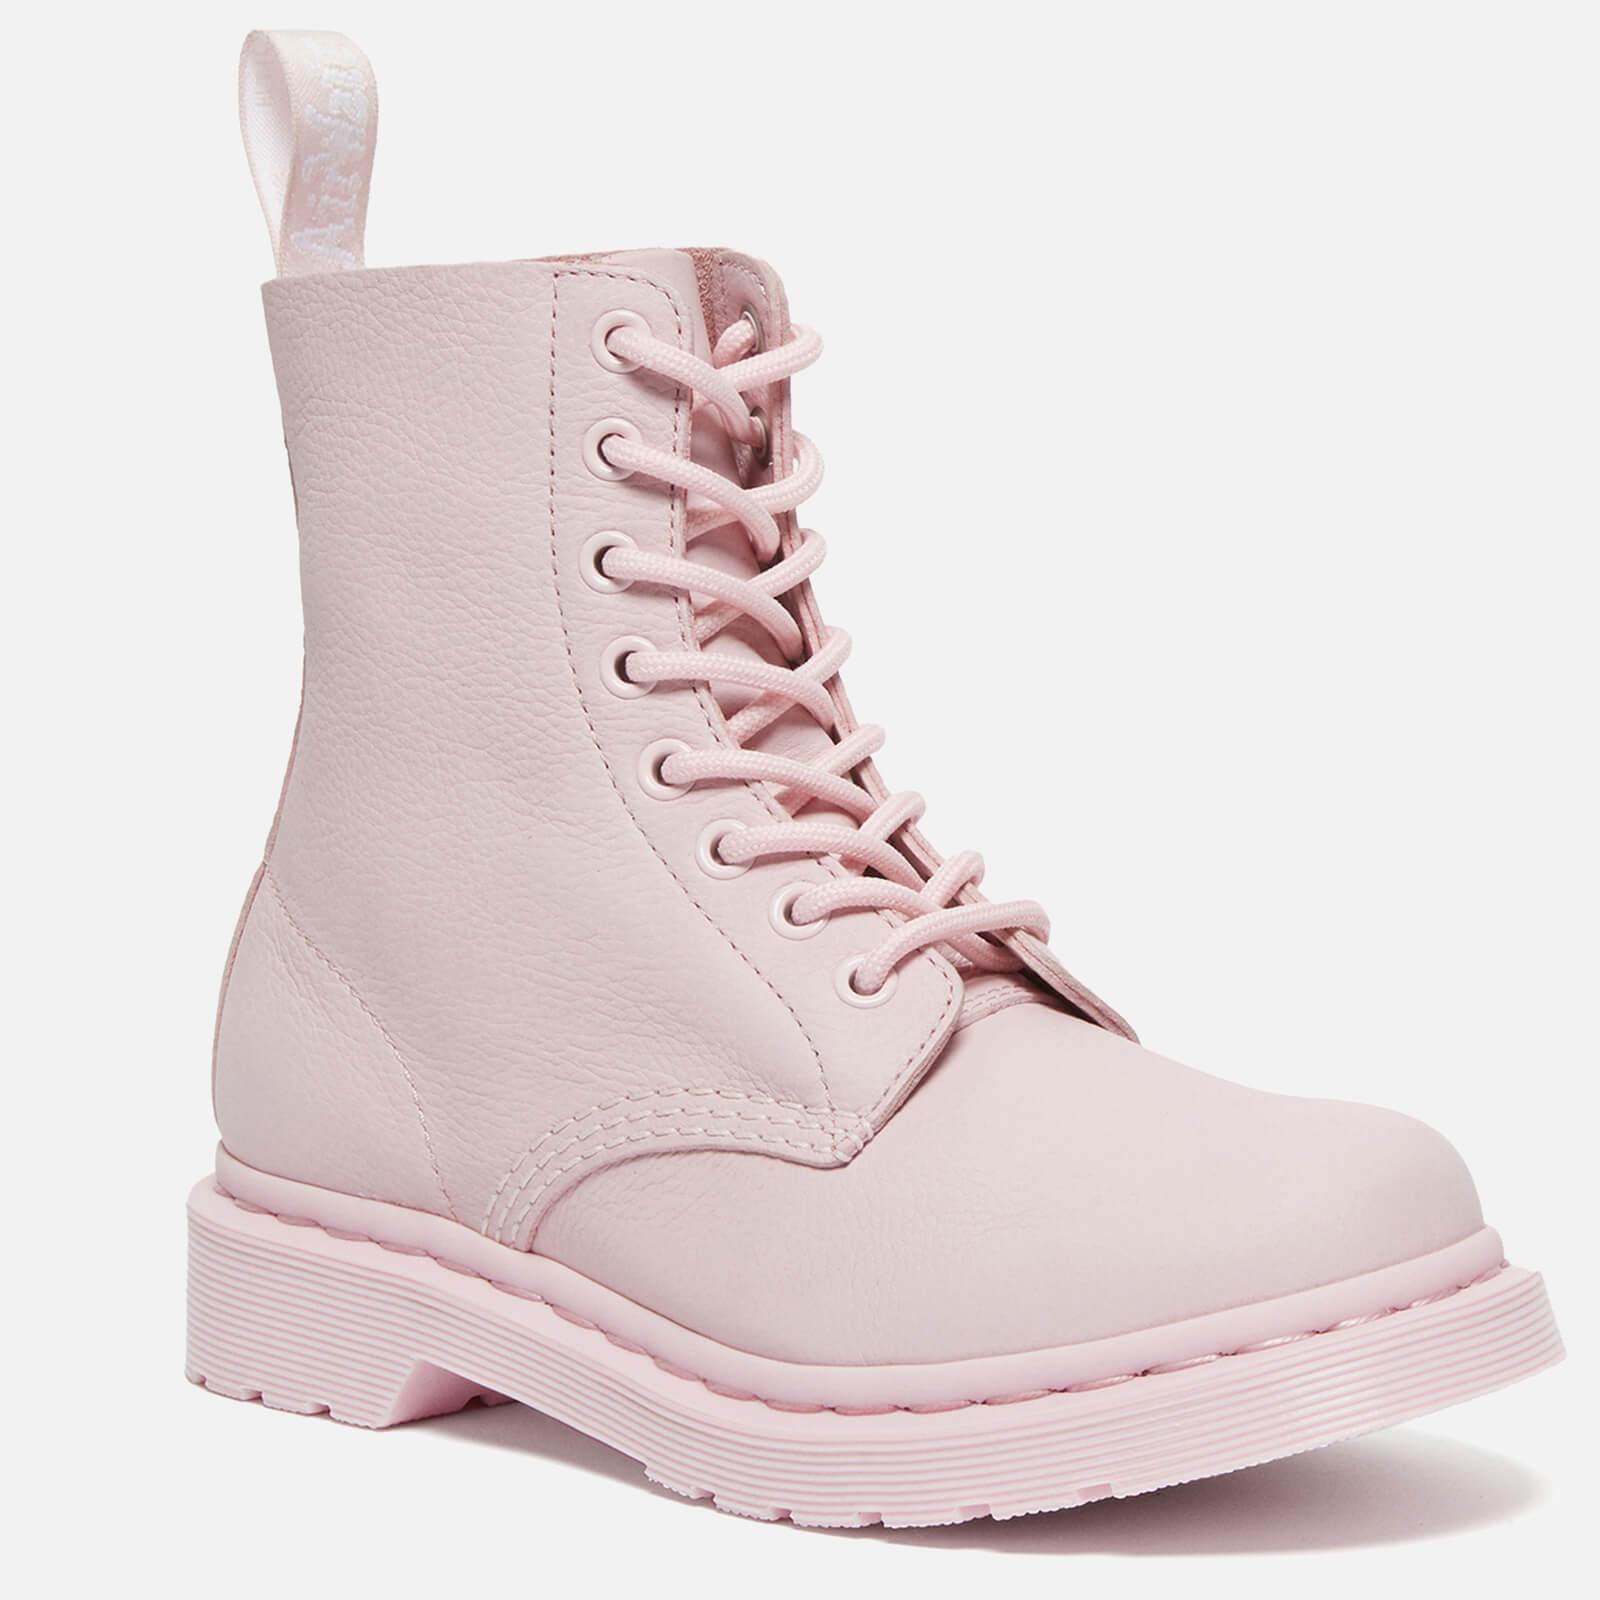 Dr. Martens 1460 Pascal Mono Virginia Leather 8-eye Boots in Pink | Lyst